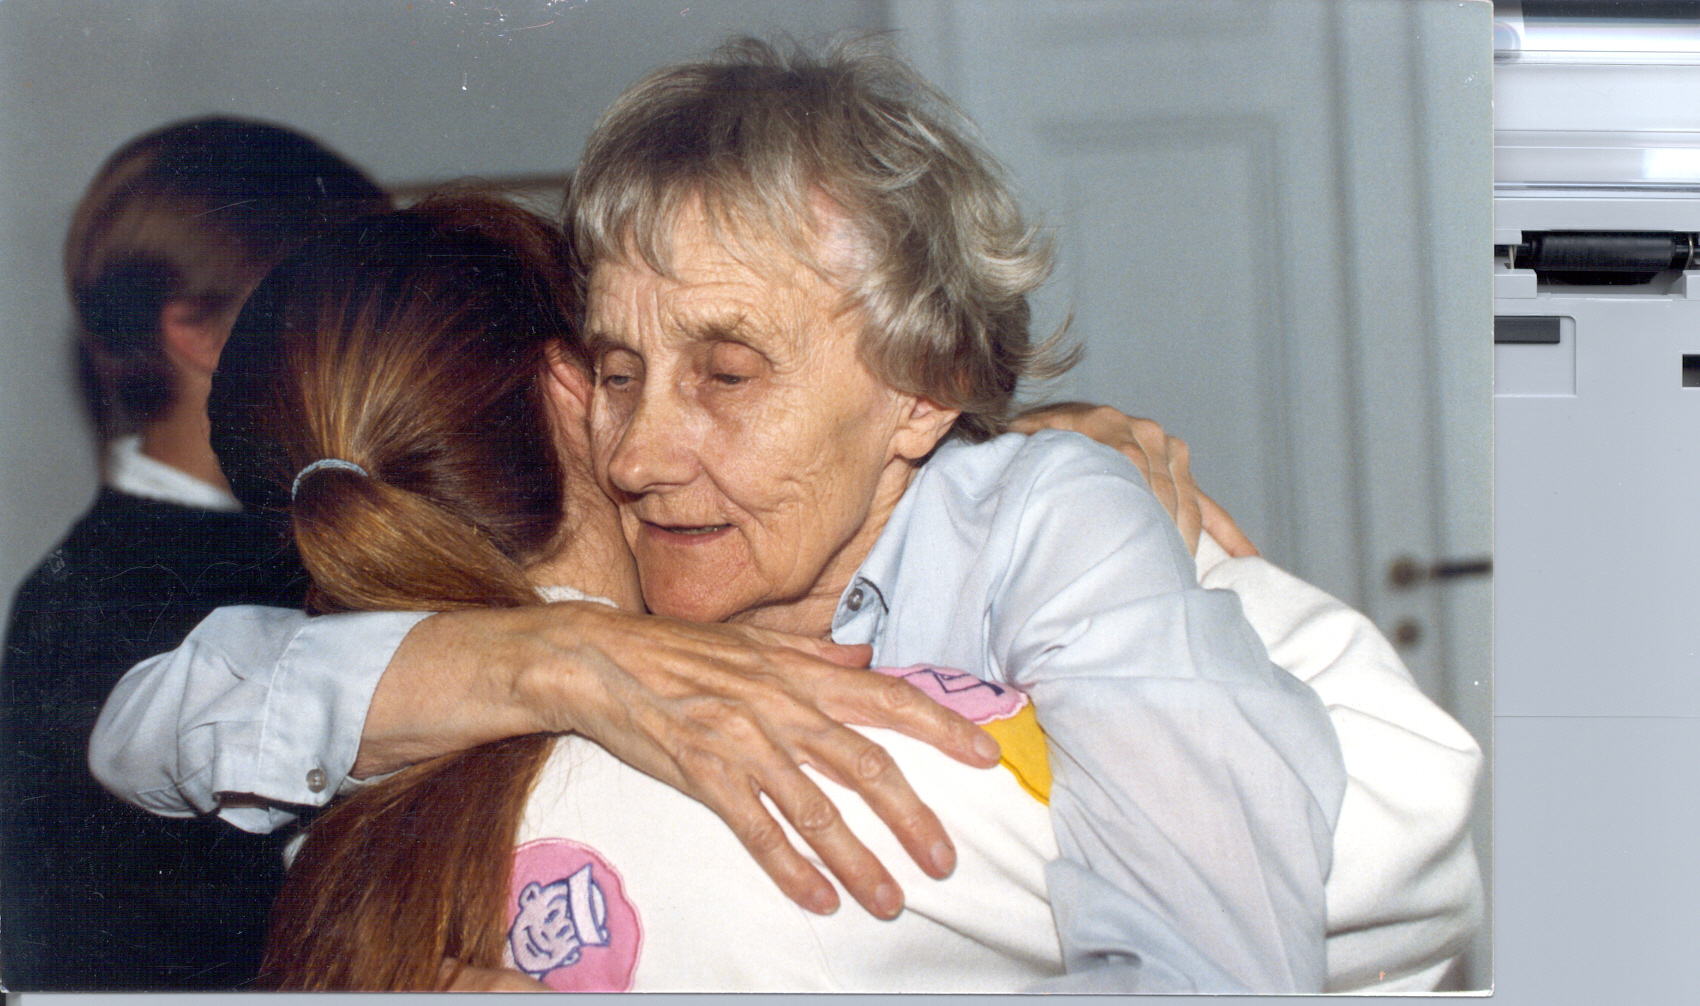 Astrid Lindgren greets Tami Erin in Stockholm, Sweden for the Royal Premiere with King Carl and Queen Sylvia of Sweden for the The New Adventures of Pippi Longstocking by Columbia Pictures.